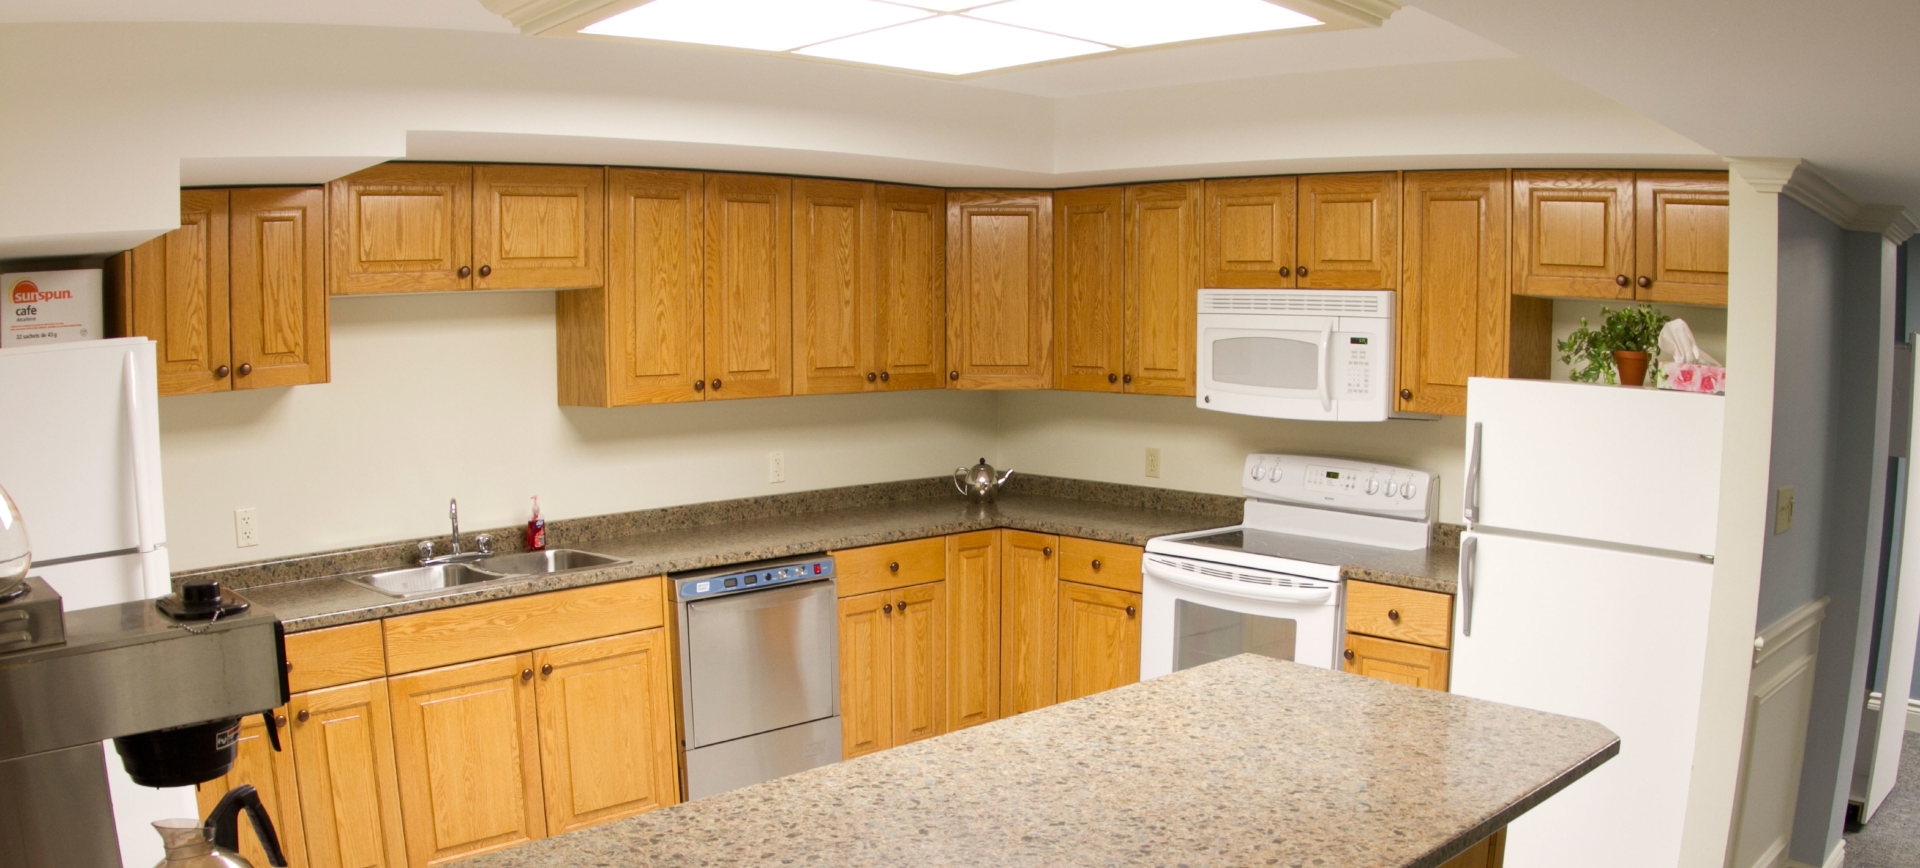 Northwood Funeral Home Kitchen